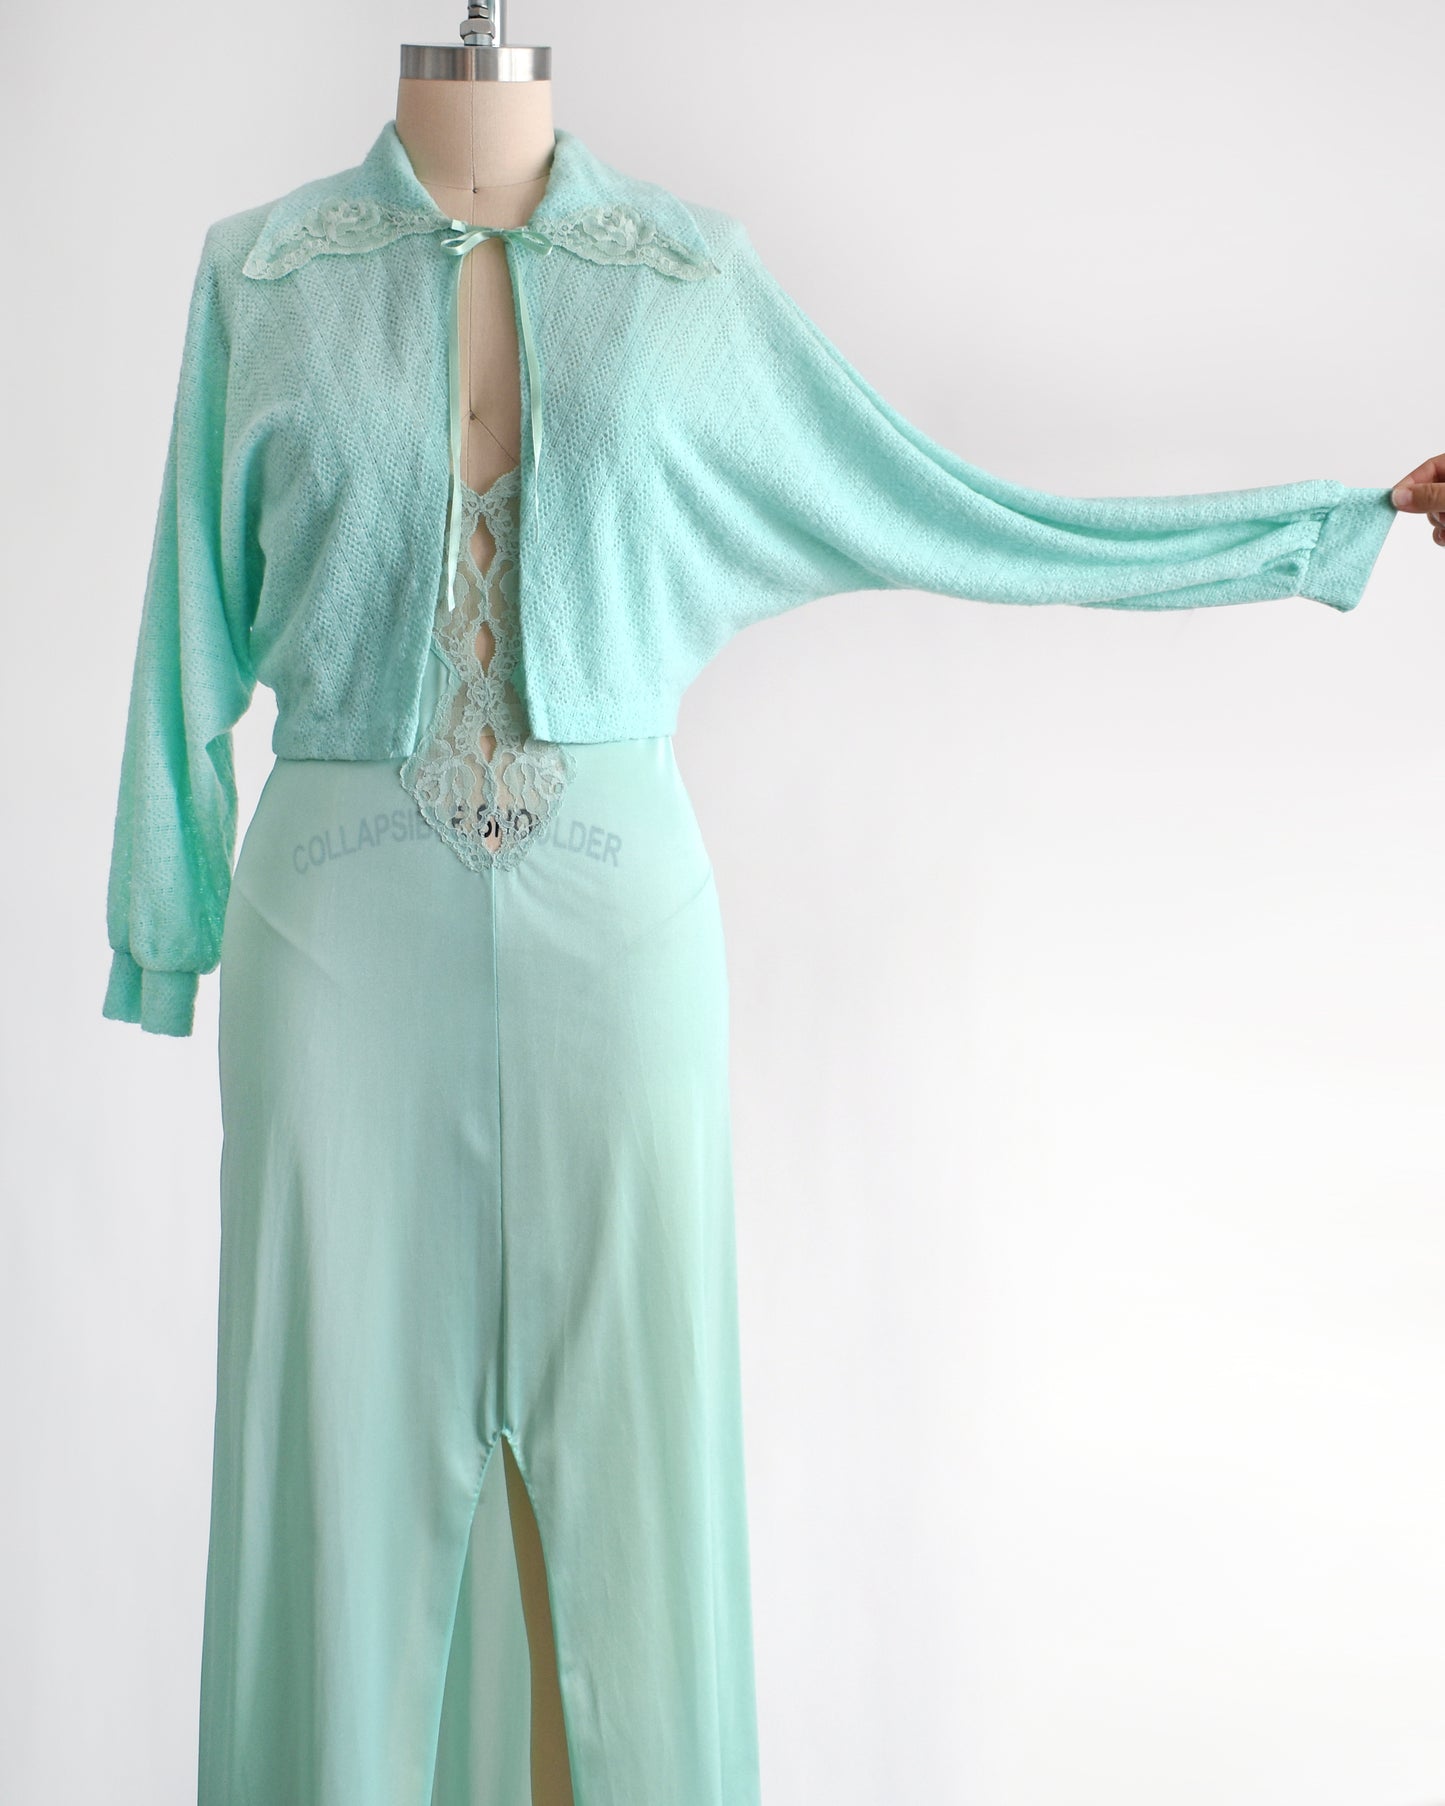 front view of a vintage 1970s mint green nightgown and bed jacket set. The sleeve is being pulled on the bed jacket showing the dolman style sleeve